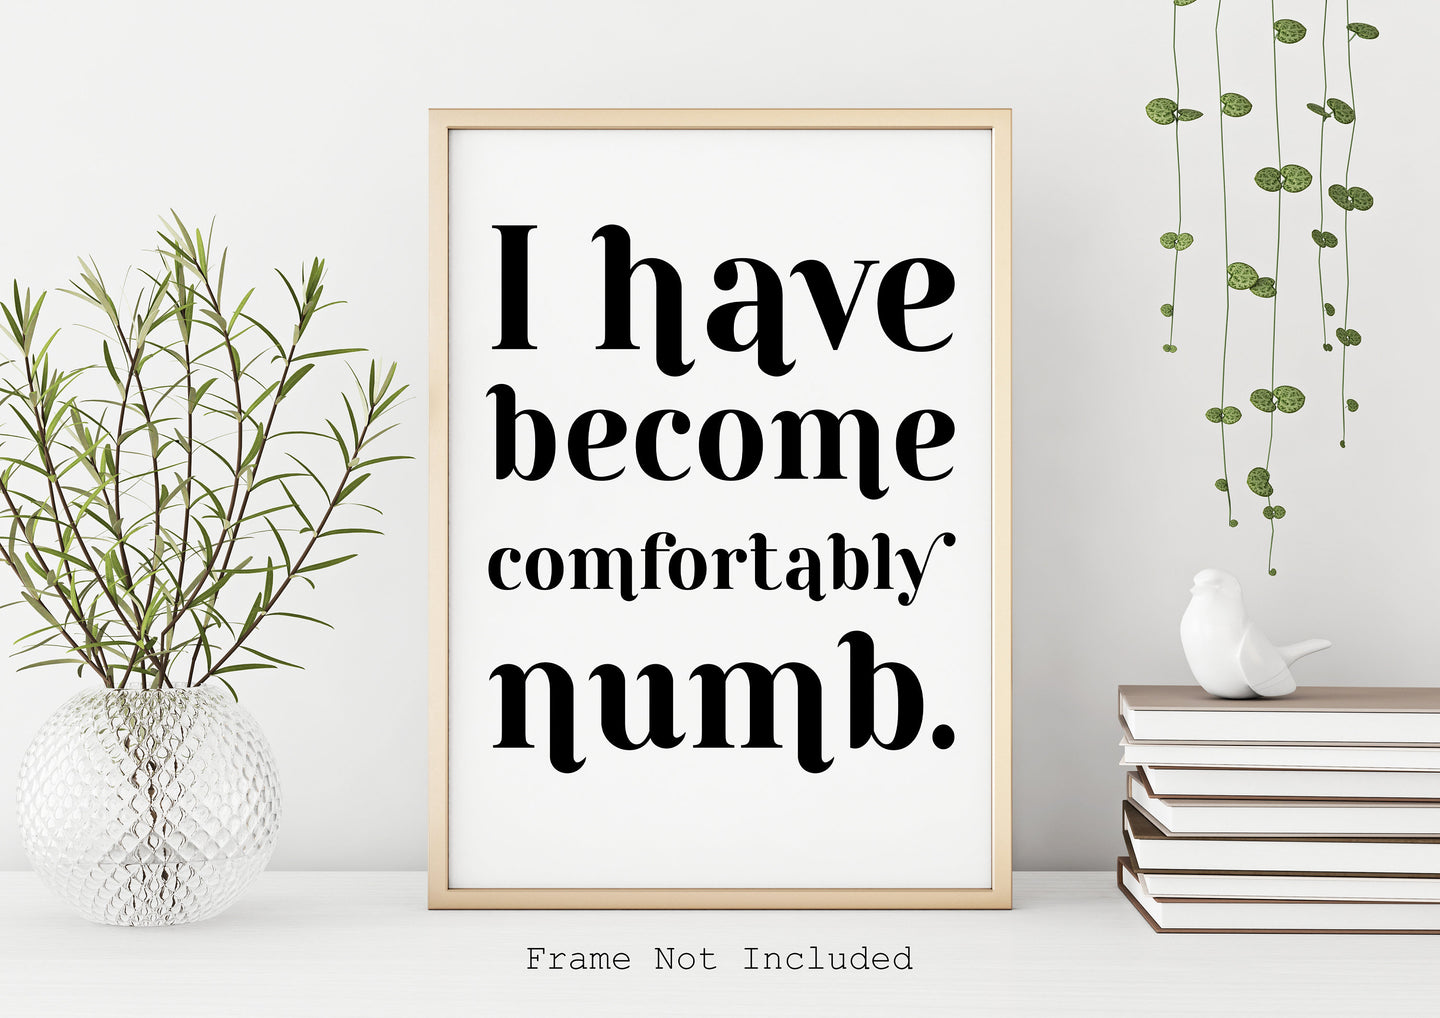 Pink Floyd - I have become comfortably numb - lyrics poster - Music Print bedroom decor home office decor record poster UNFRAMED